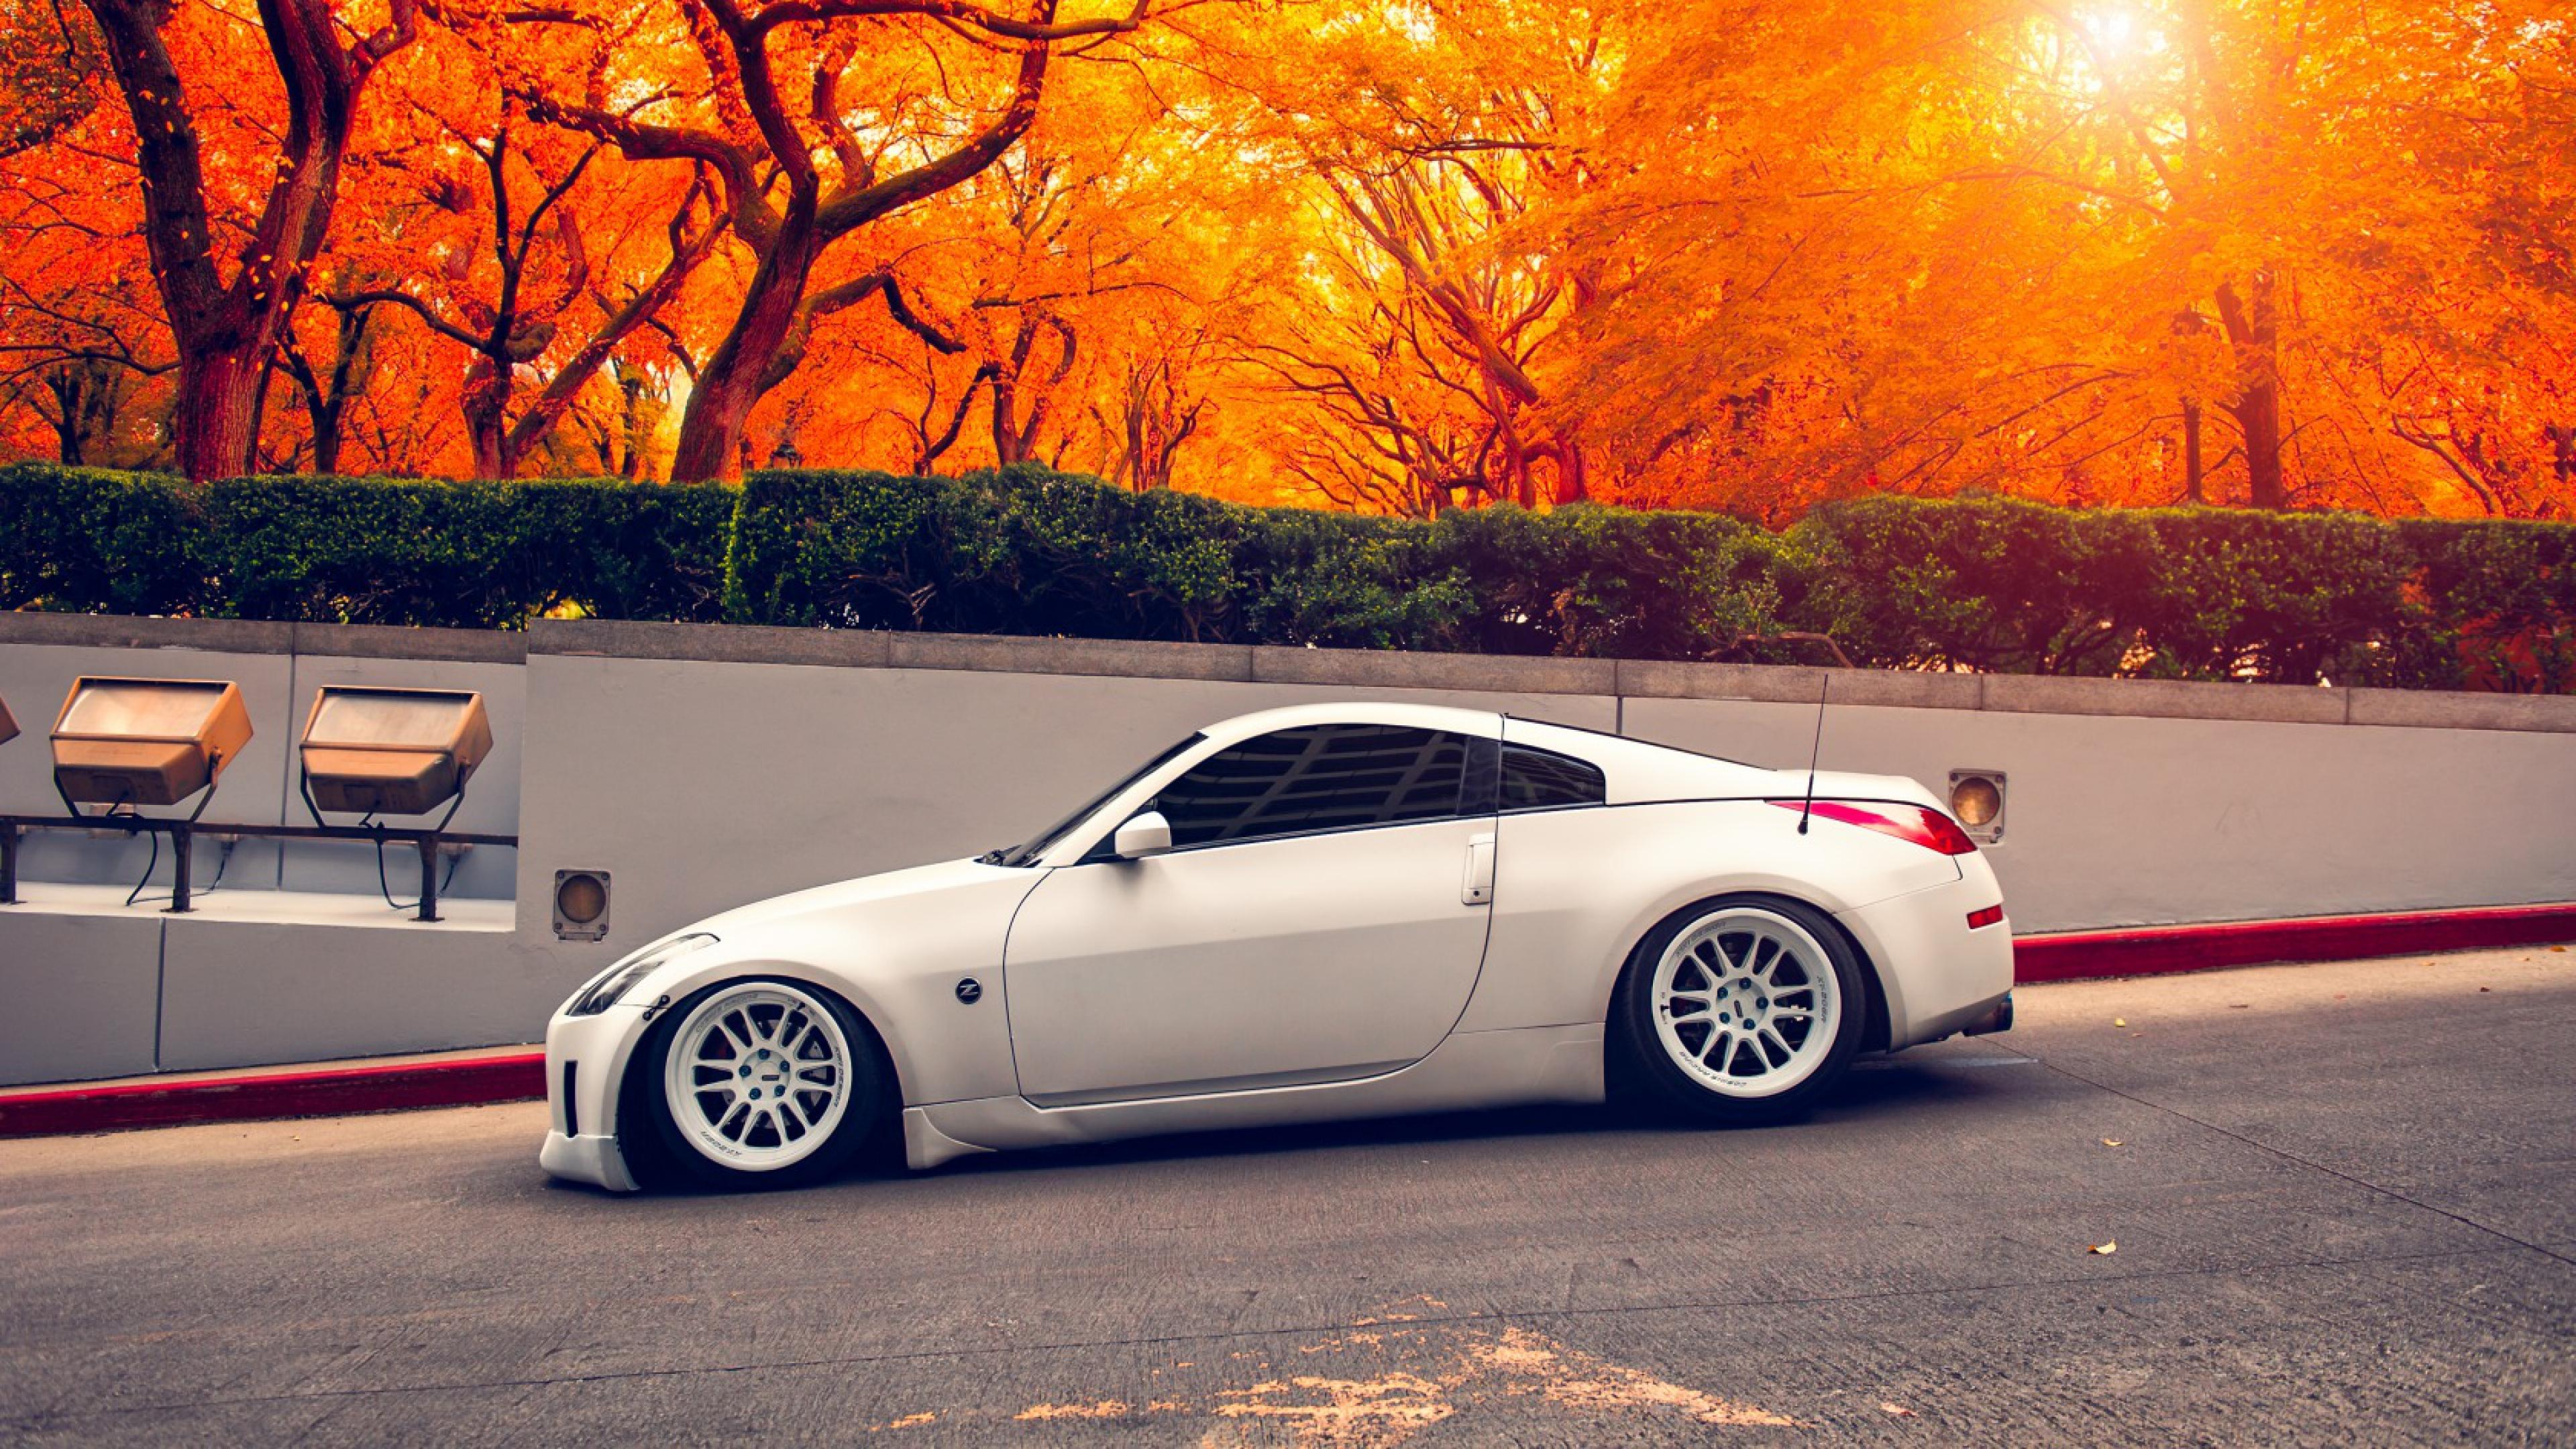 Nissan 350Z Autumn, HD Cars, 4k Wallpapers, Image, Backgrounds